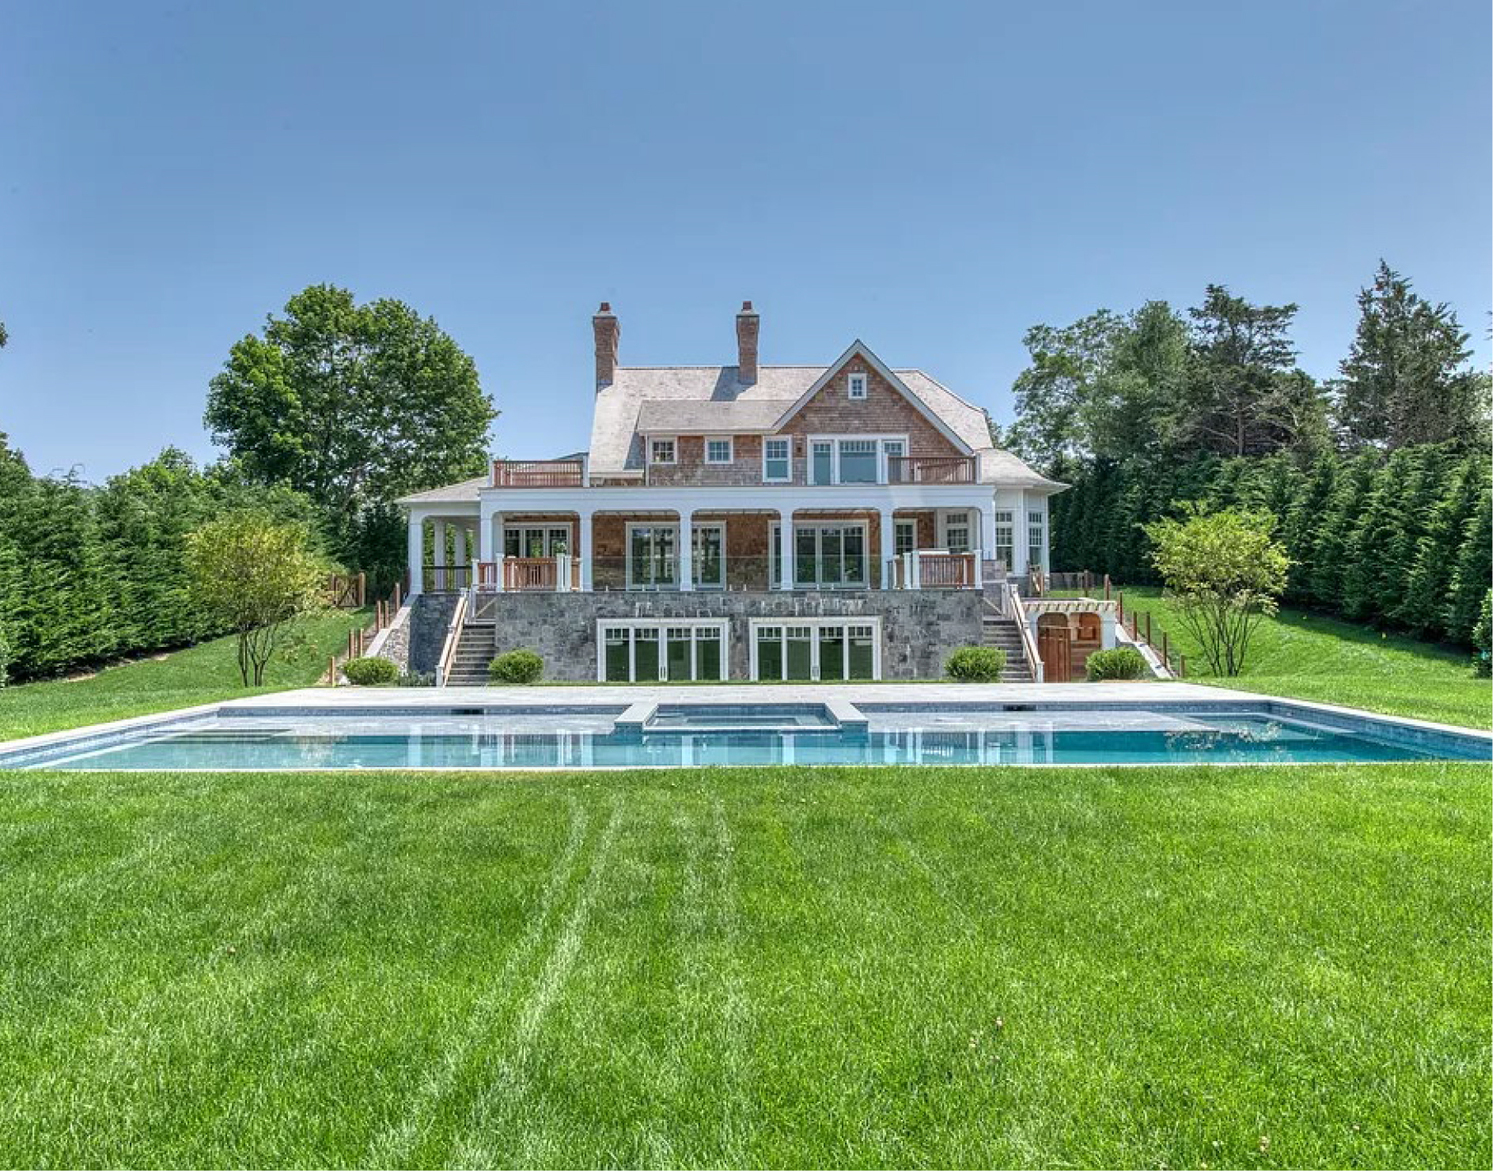 The same house, as built, from the rear with a lower level at ground level. EAST HAMPTON TOWN